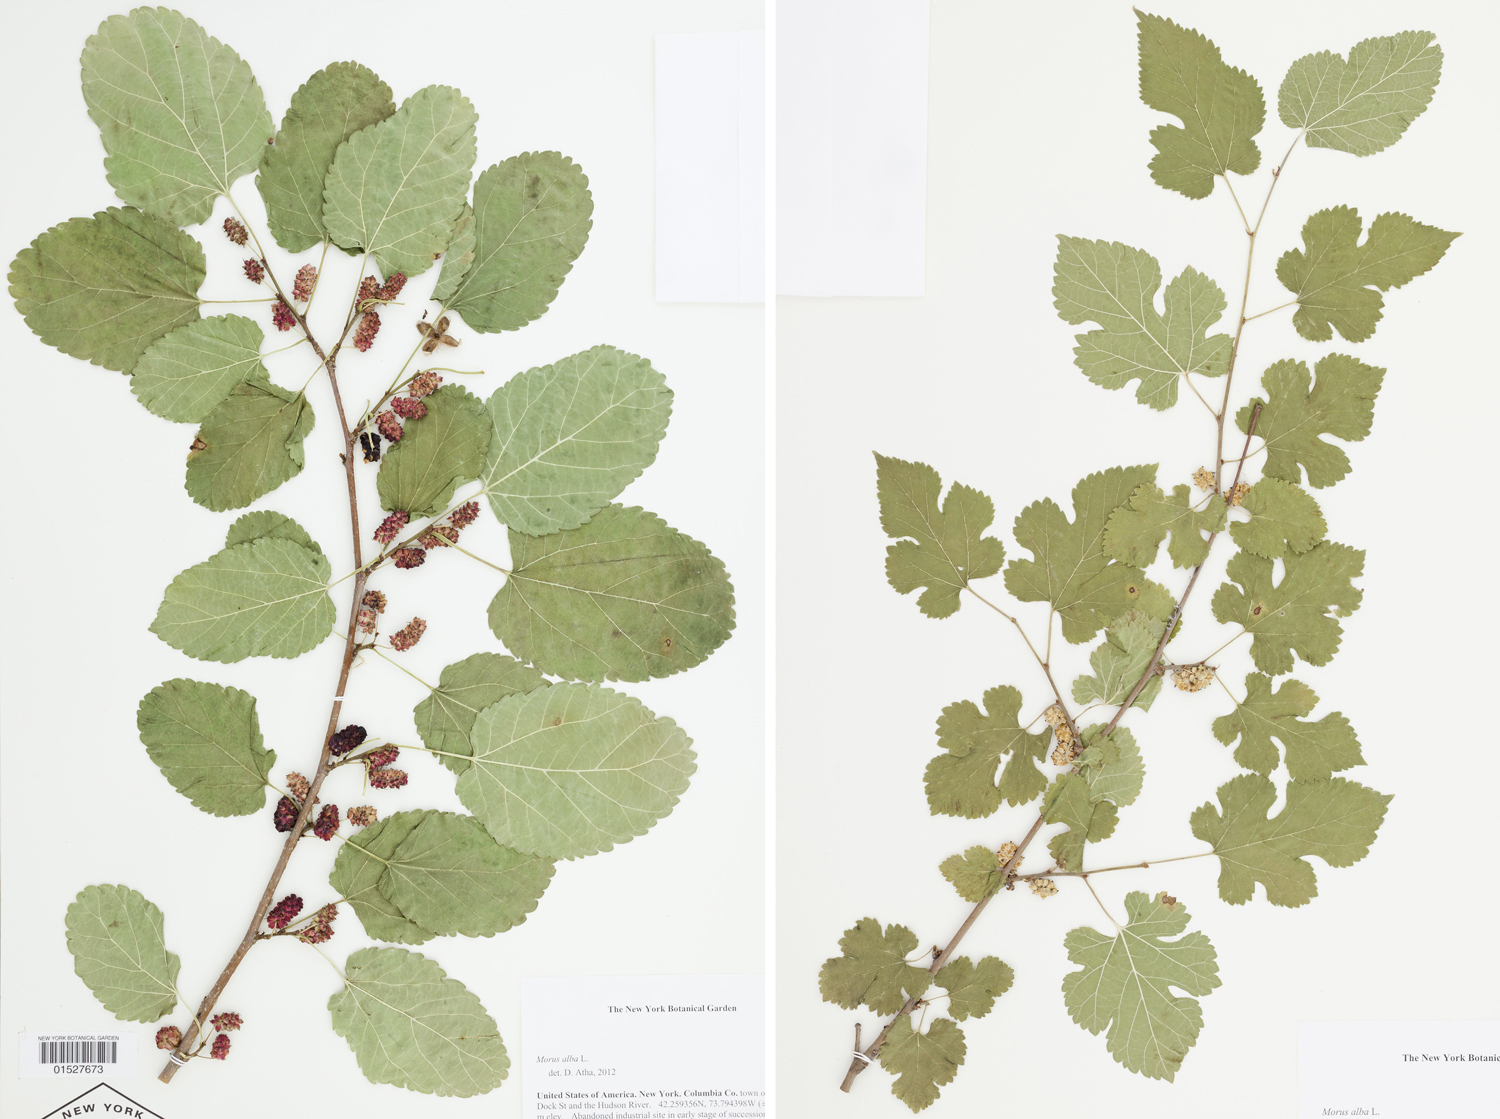 2-Panel photographic figure of herbarium specimens of white mulberry branches with leaves. Panel 1: Branch with simple, toothed, unlobed leaves. Panel 2: Branch with simple, lobed, toothed leaves.